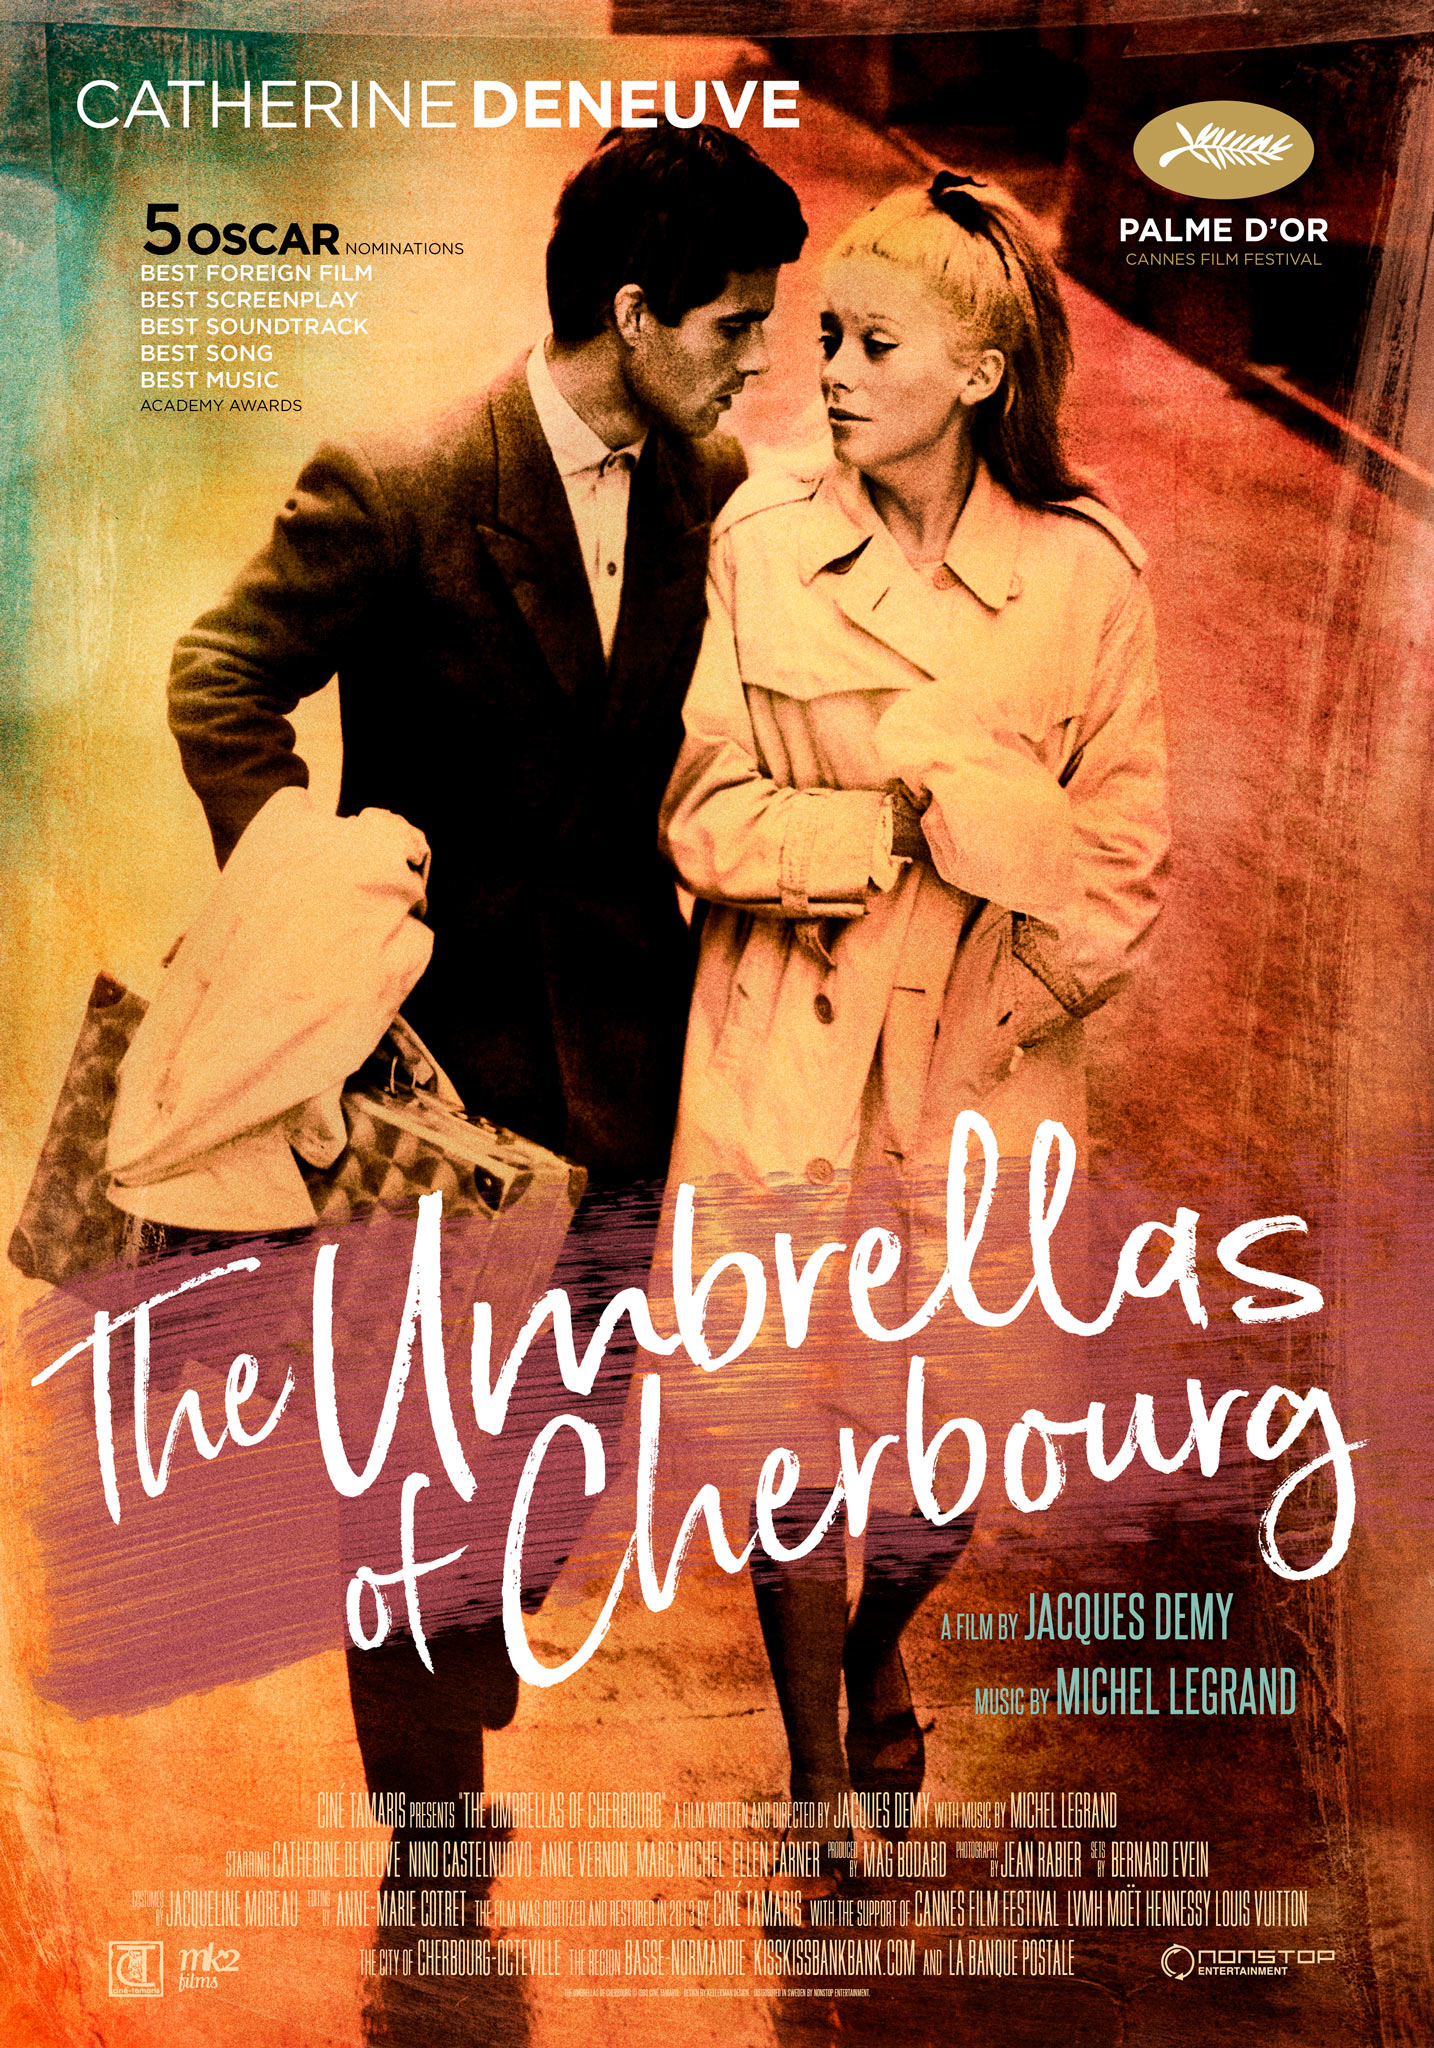 The Umbrellas of Cherbourg (1964) theatrical onesheet